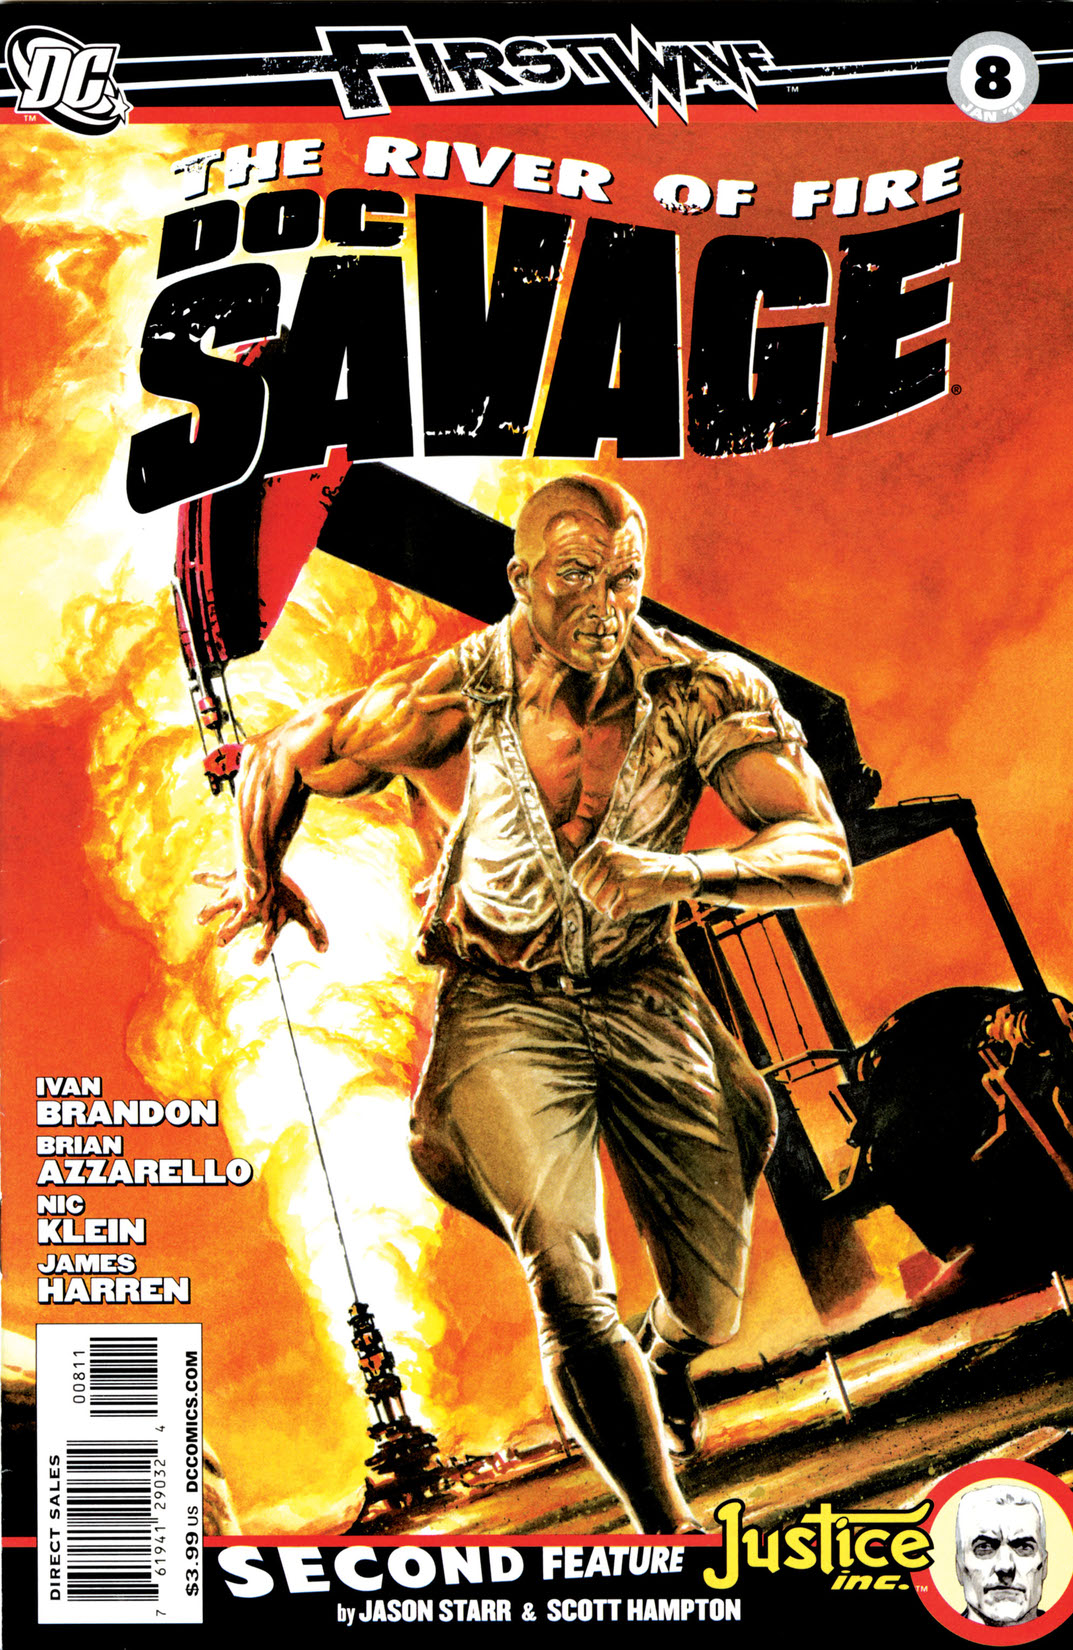 Doc Savage #8 preview images